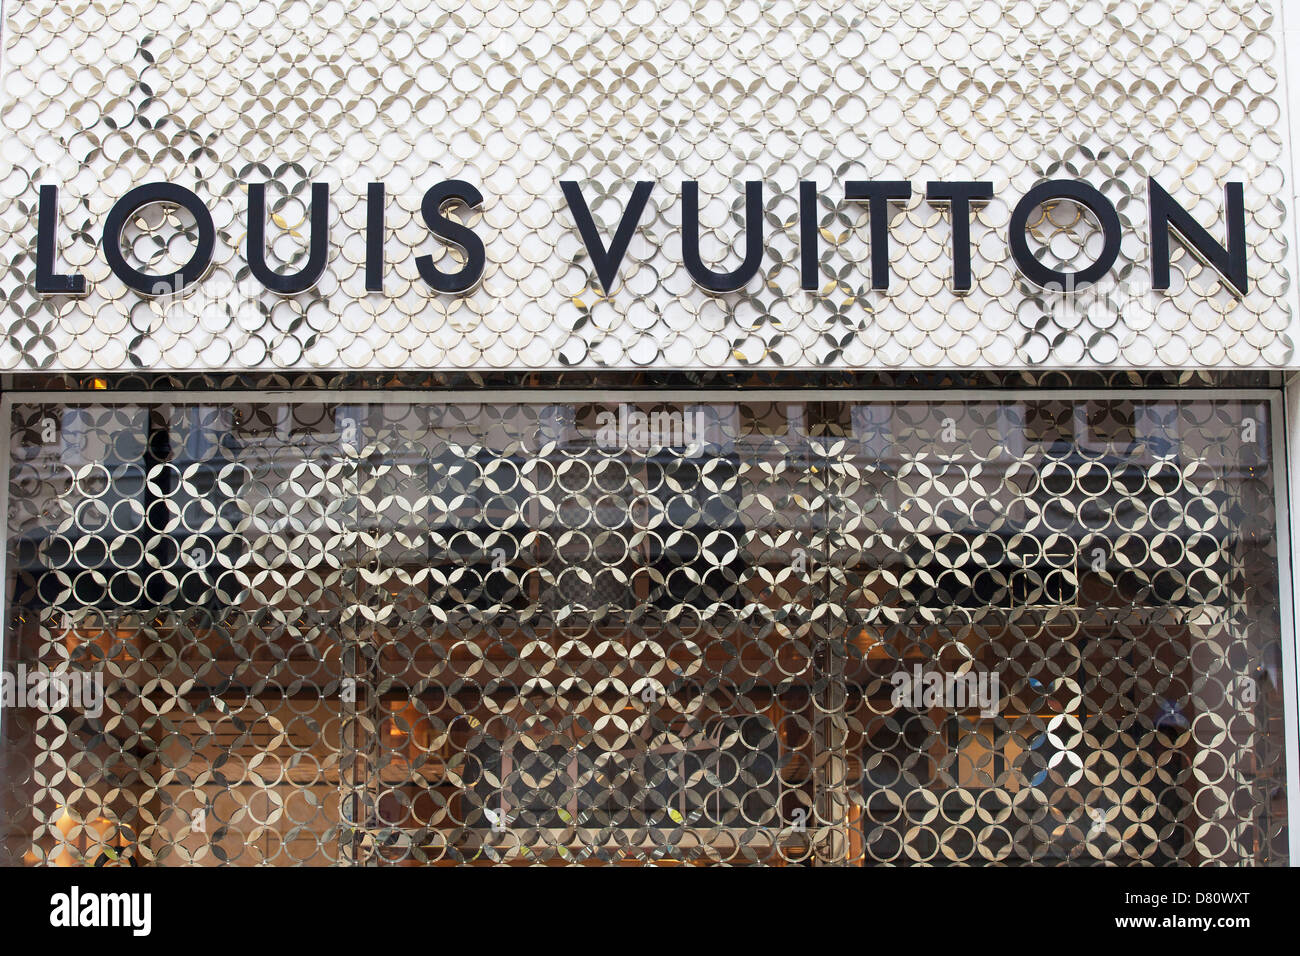 London, UK 16 Nov 2019. LV Louis Vuitton sign logo. LV is a famous high end  fashion house manufacturer and luxury. Credit: Waldemar Sikora Stock Photo  - Alamy